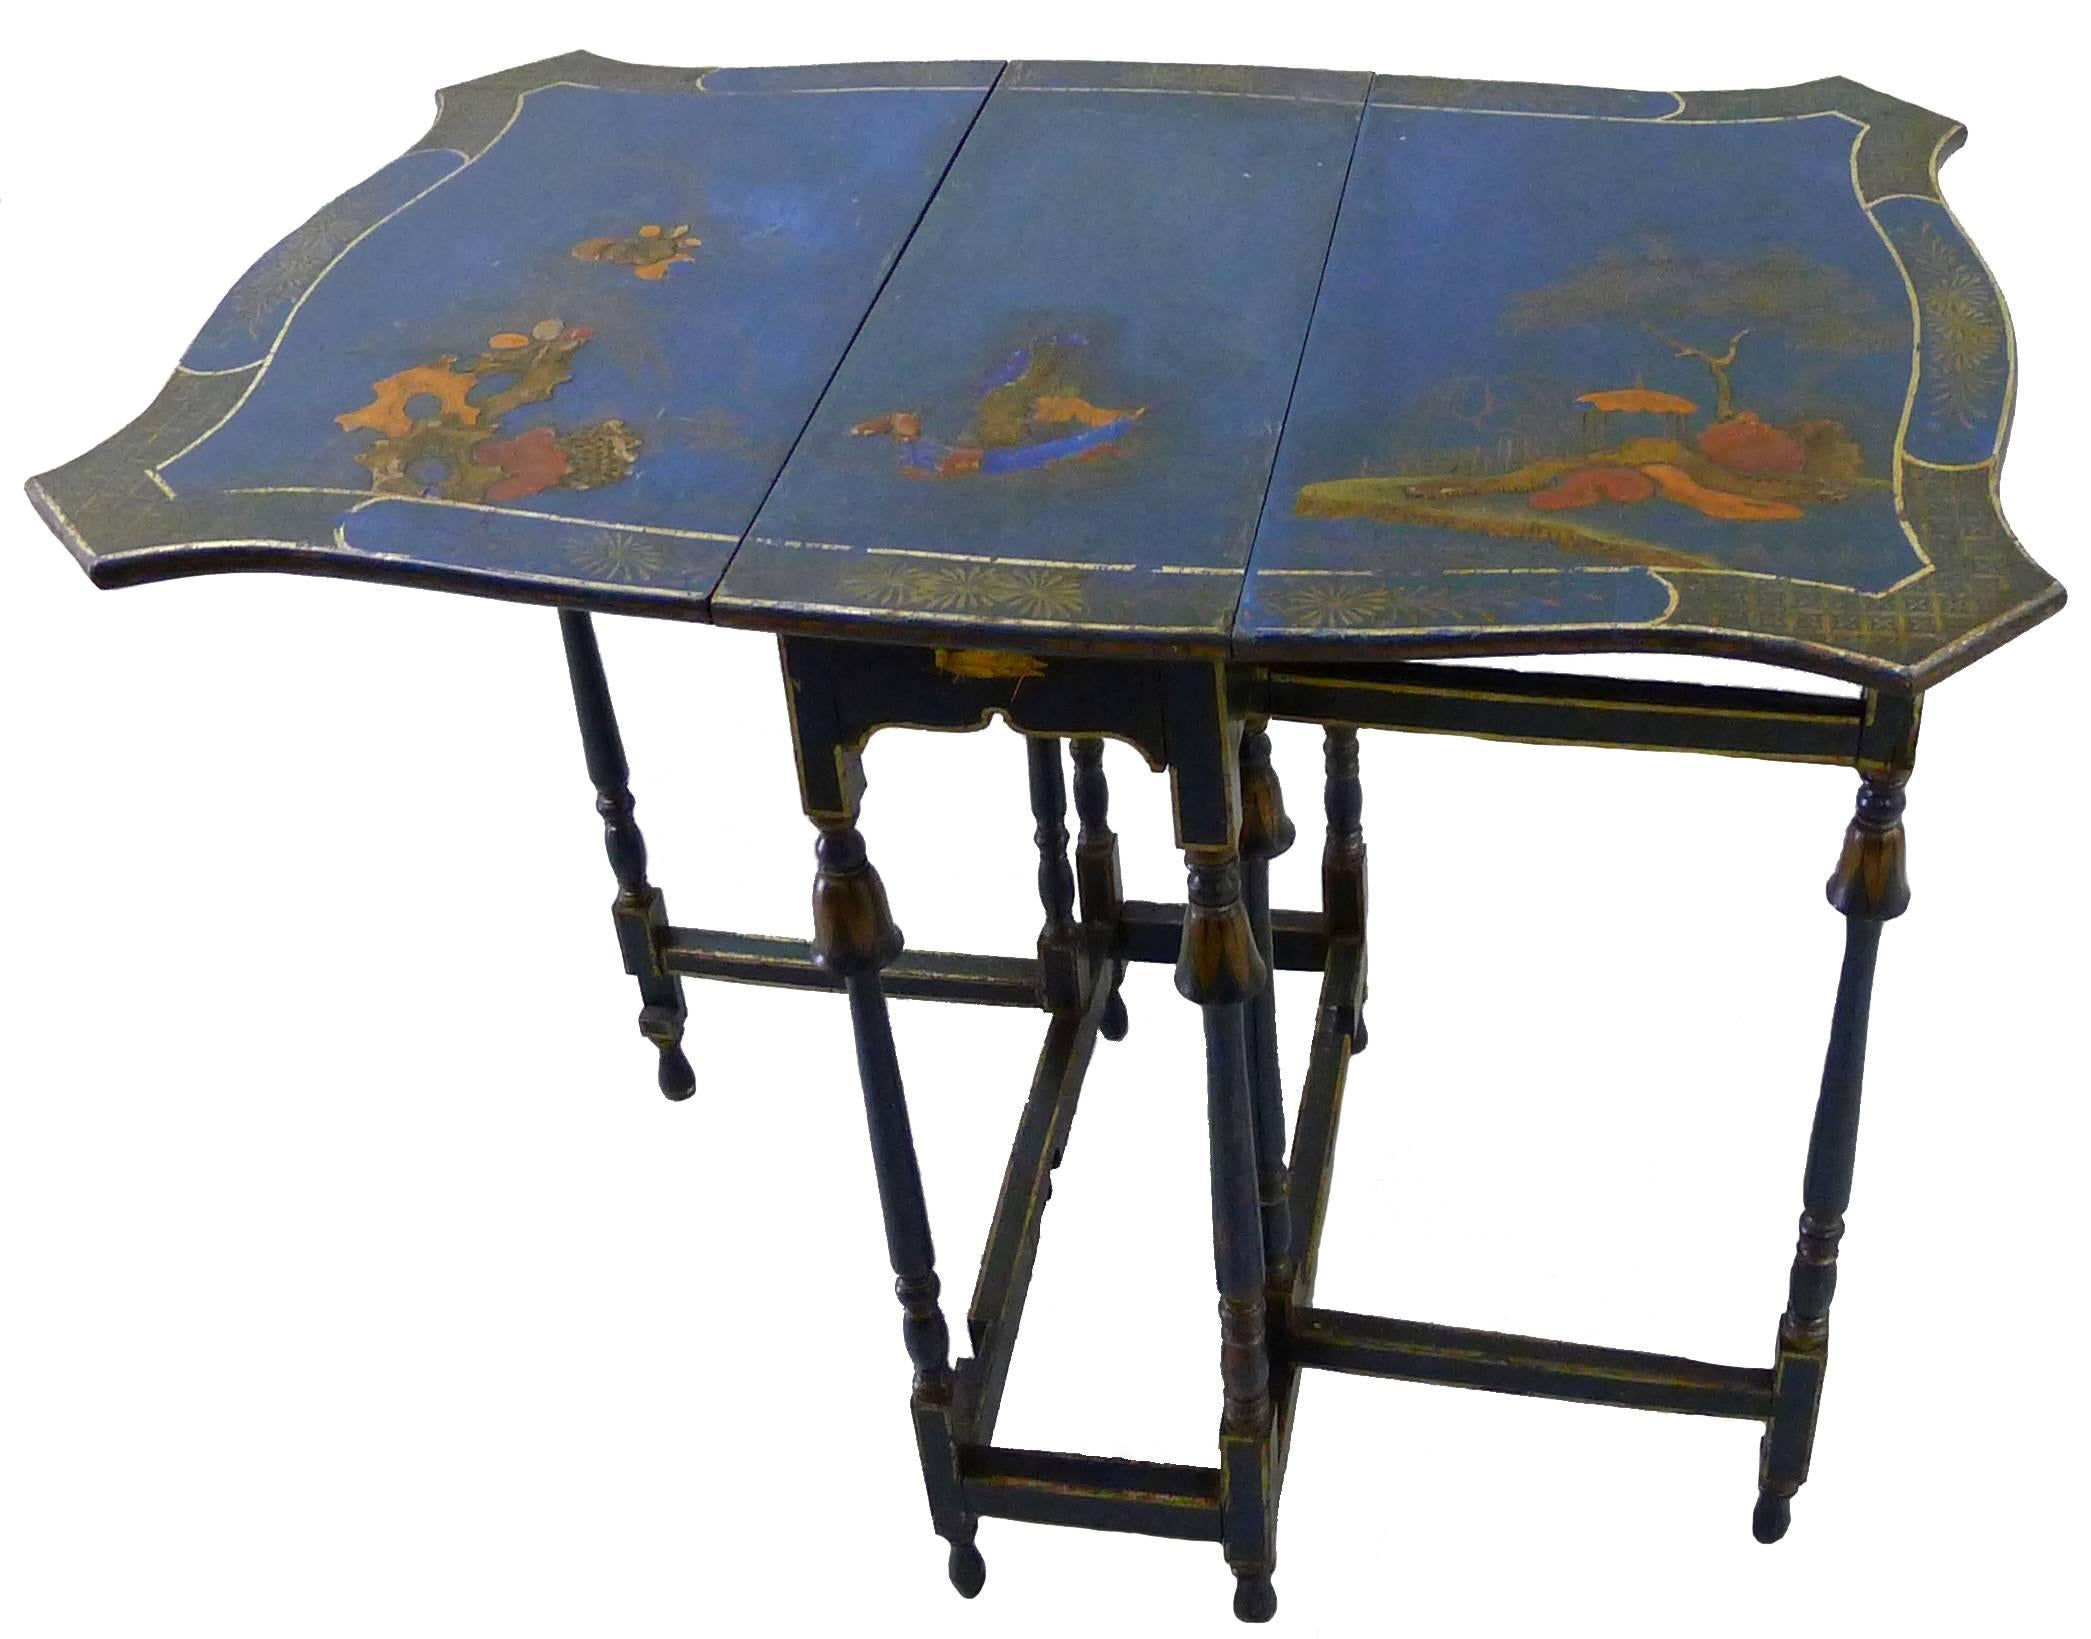 Painted Chinese Export-Style Chinoiserie Gate-Leg Drop Leaf Tea Table For Sale